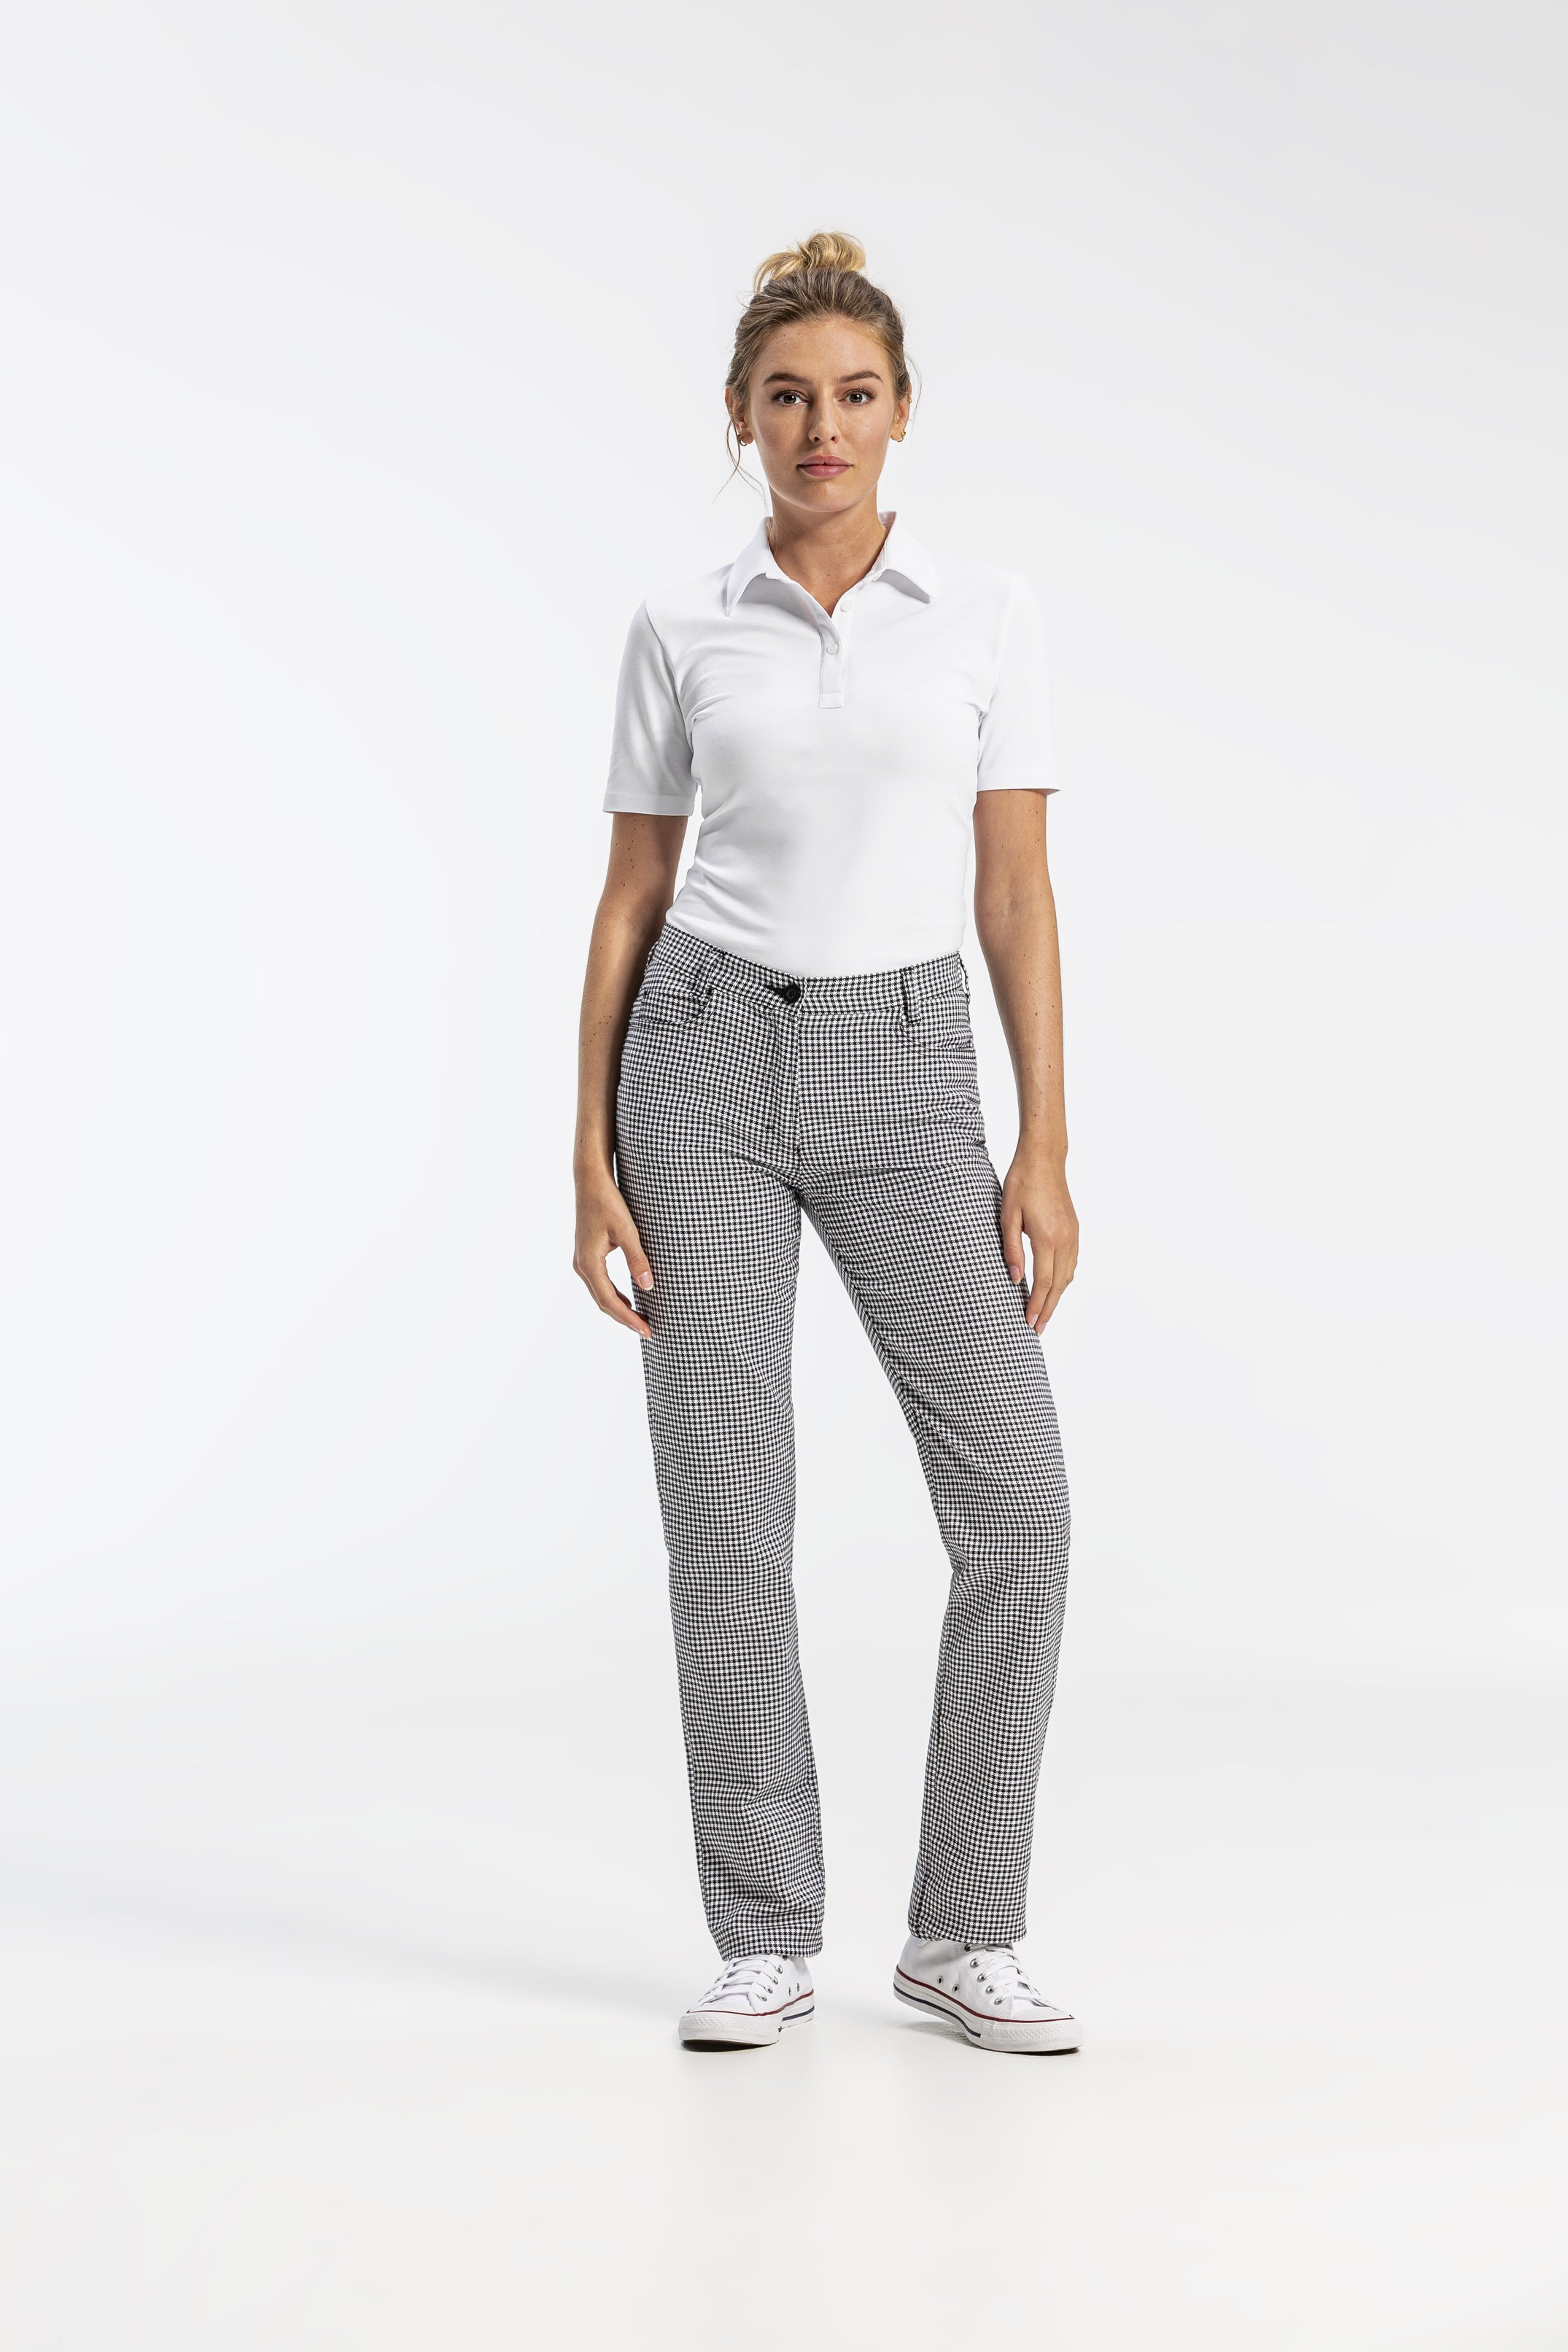 Ladies trousers check pattern with elastic waistband regular fit